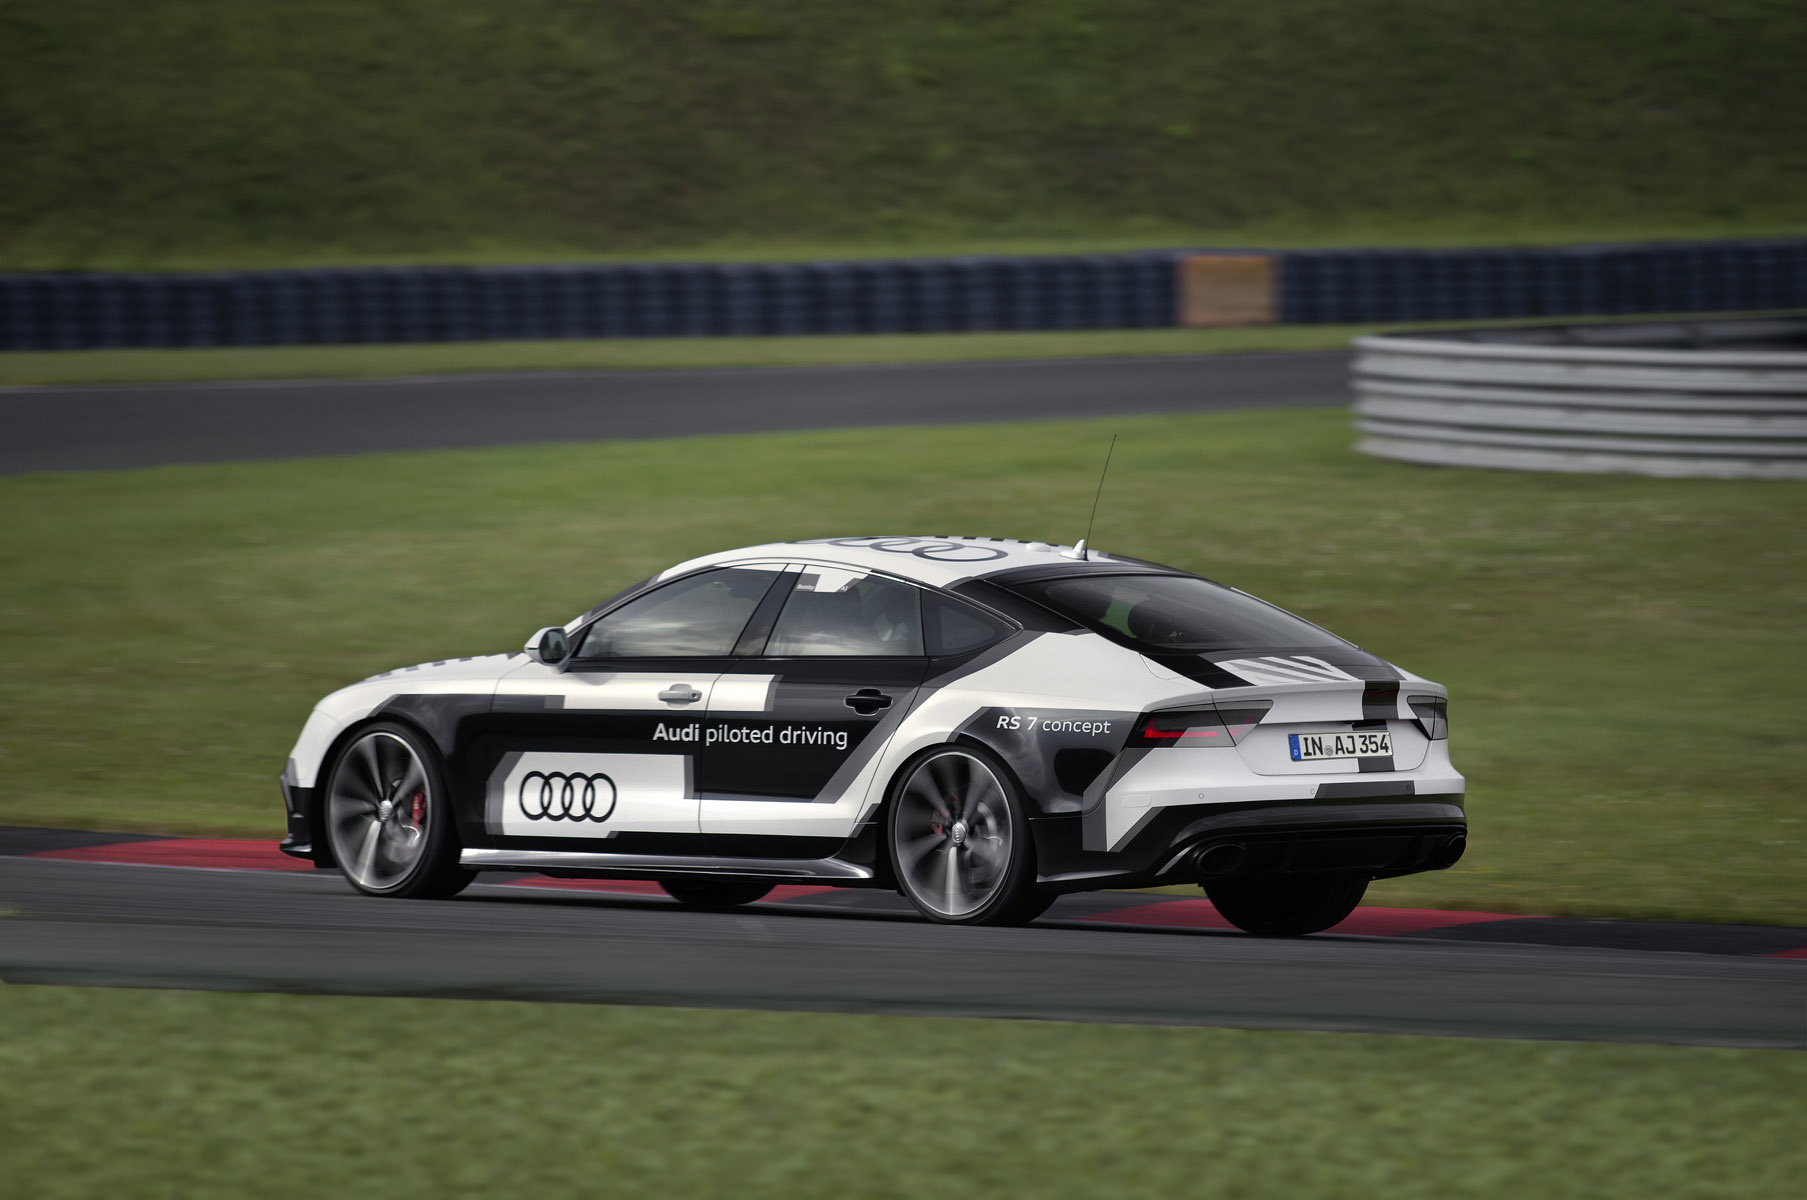 Audi RS 7 Piloted Driving Concept Car